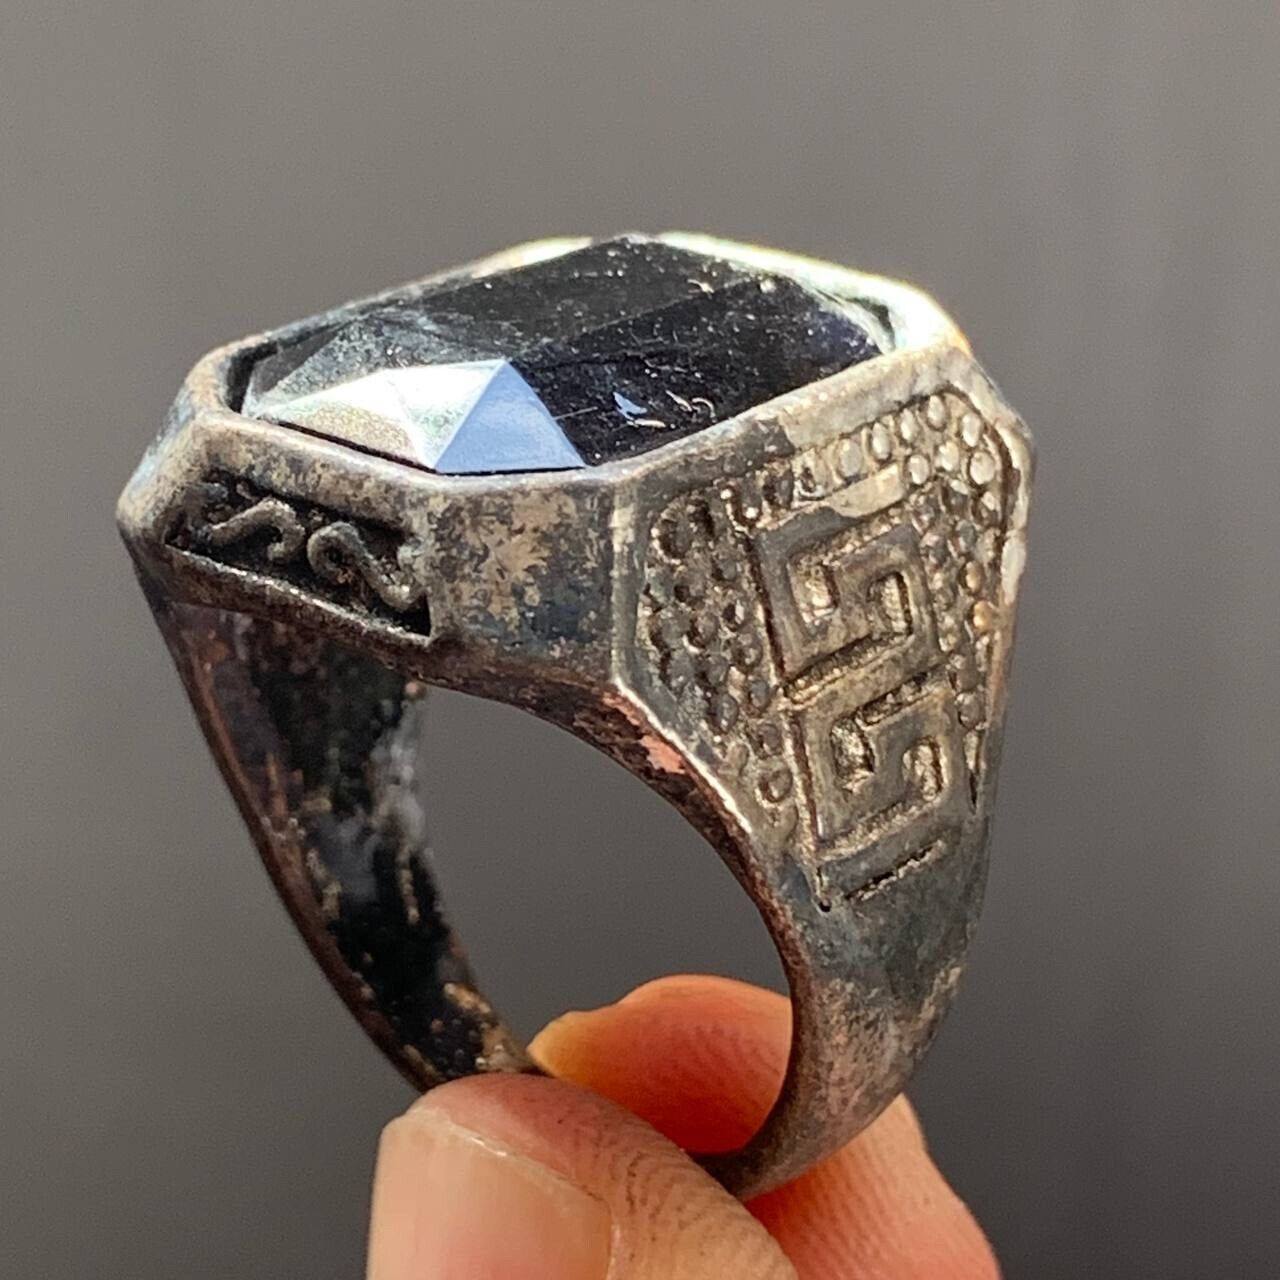 VERY RARE ANCIENT MEDIEVAL VINTAGE SILVER RING WITH BLACK STONE AMAZING ARTIFACT